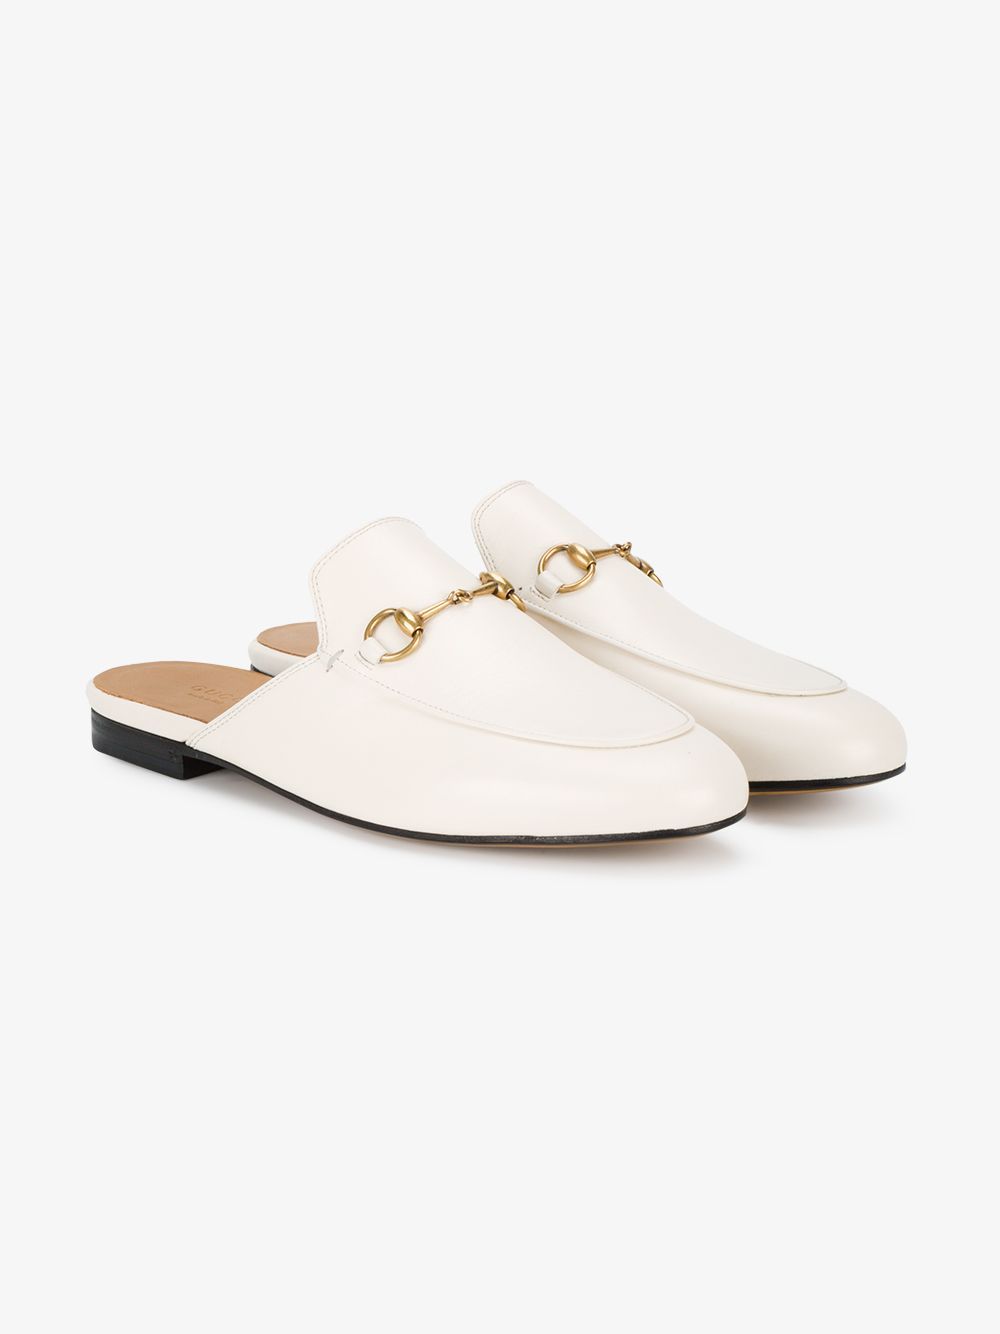 Gucci White Princetown Leather Mules | Browns Fashion